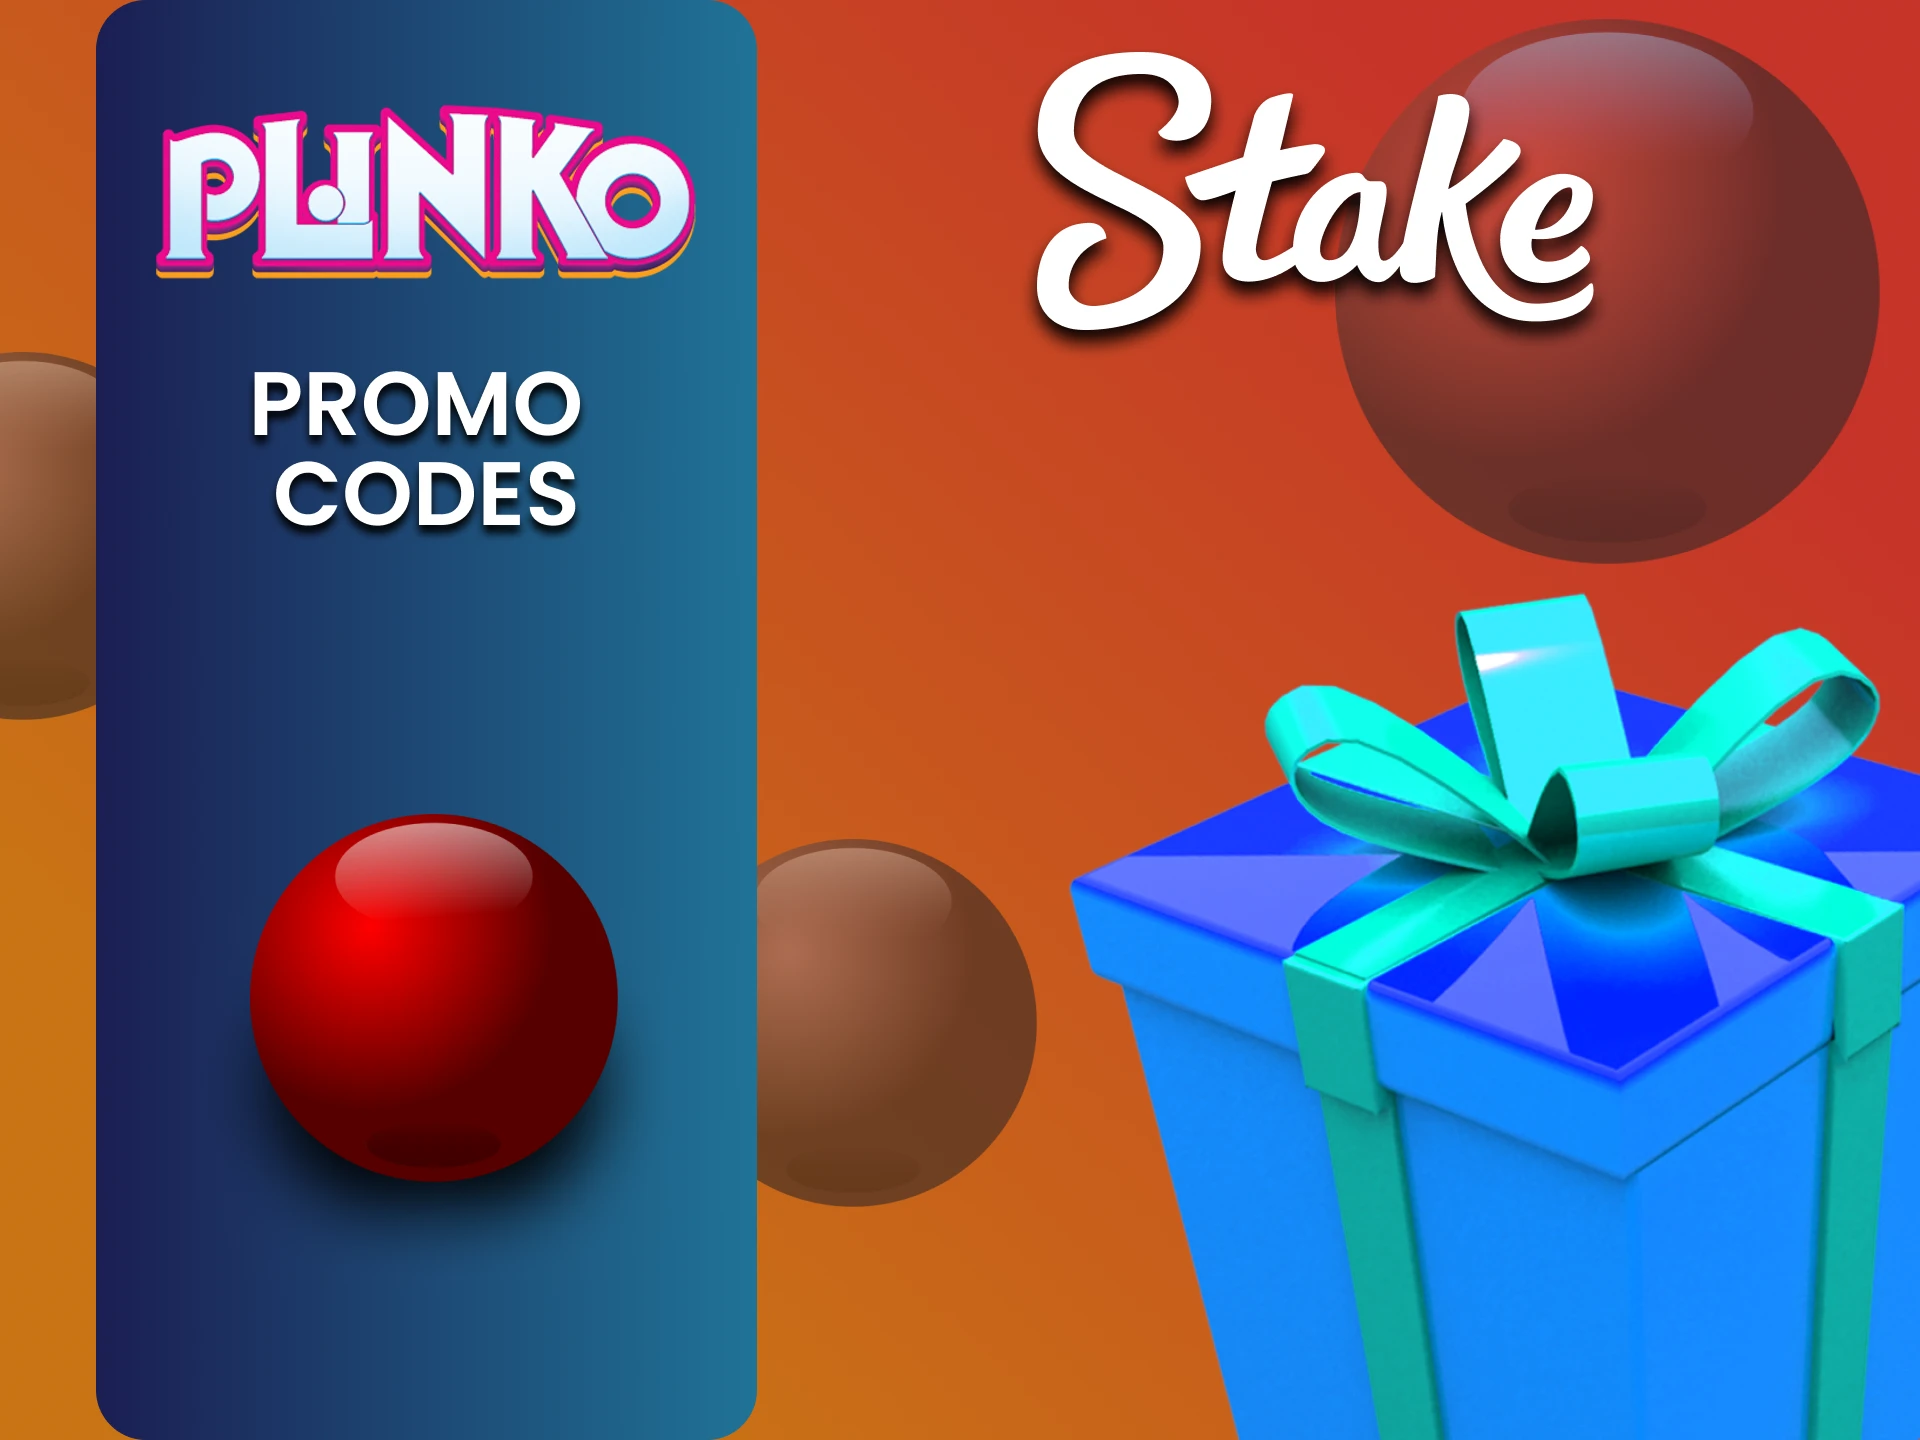 There is a special promotional code for the Plinko game on the Stake website.